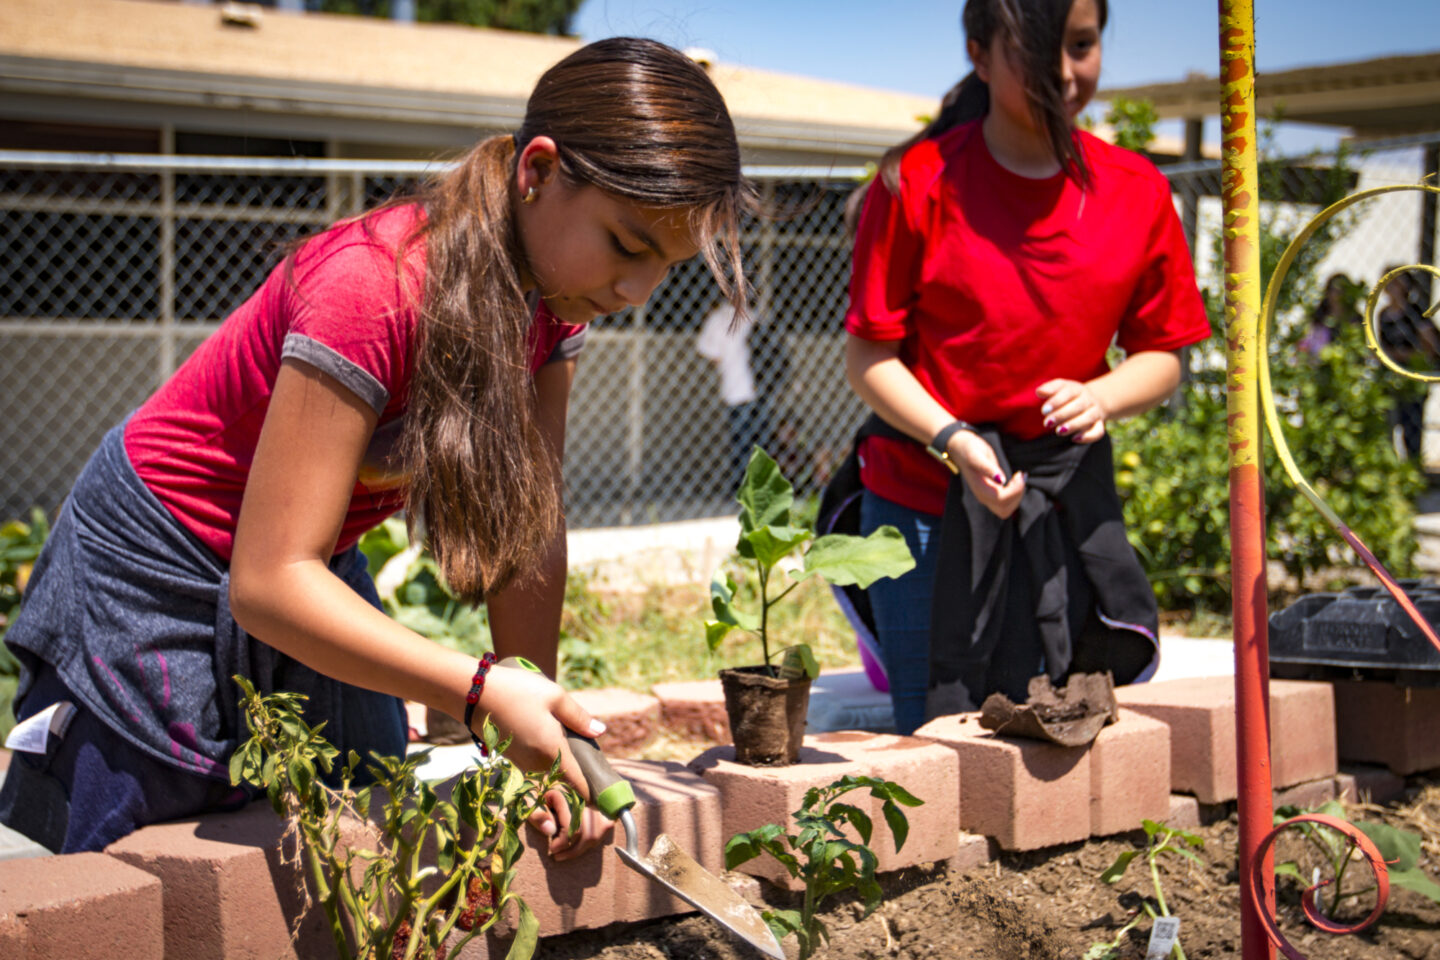 Students help plant a garden at a middle school in California